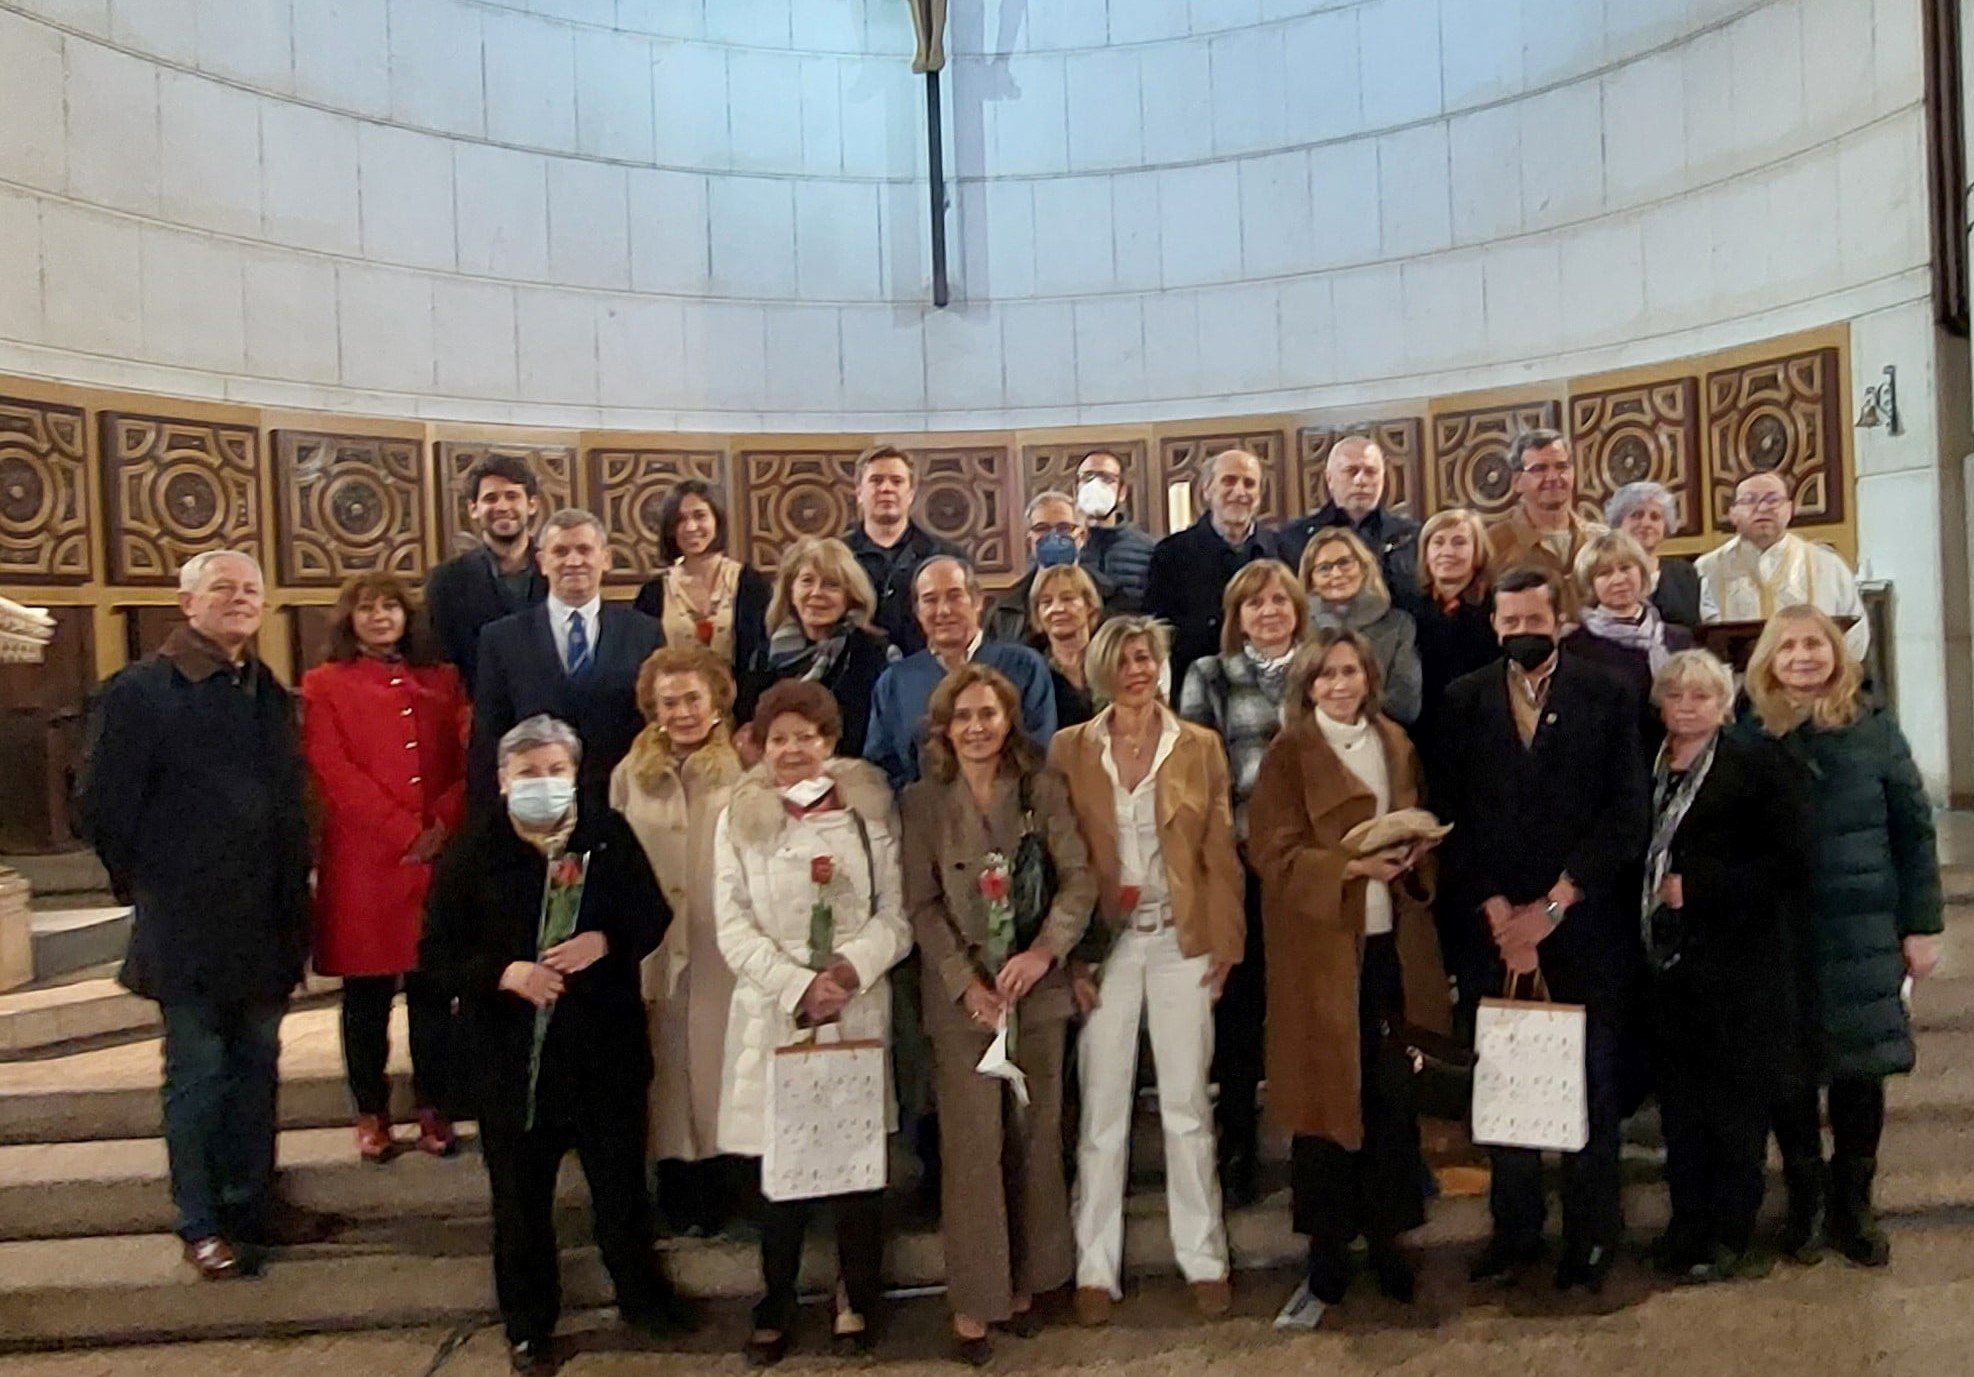 Ukrainian community of Spain for the Rights, Honor and Dignity of Ukrainians